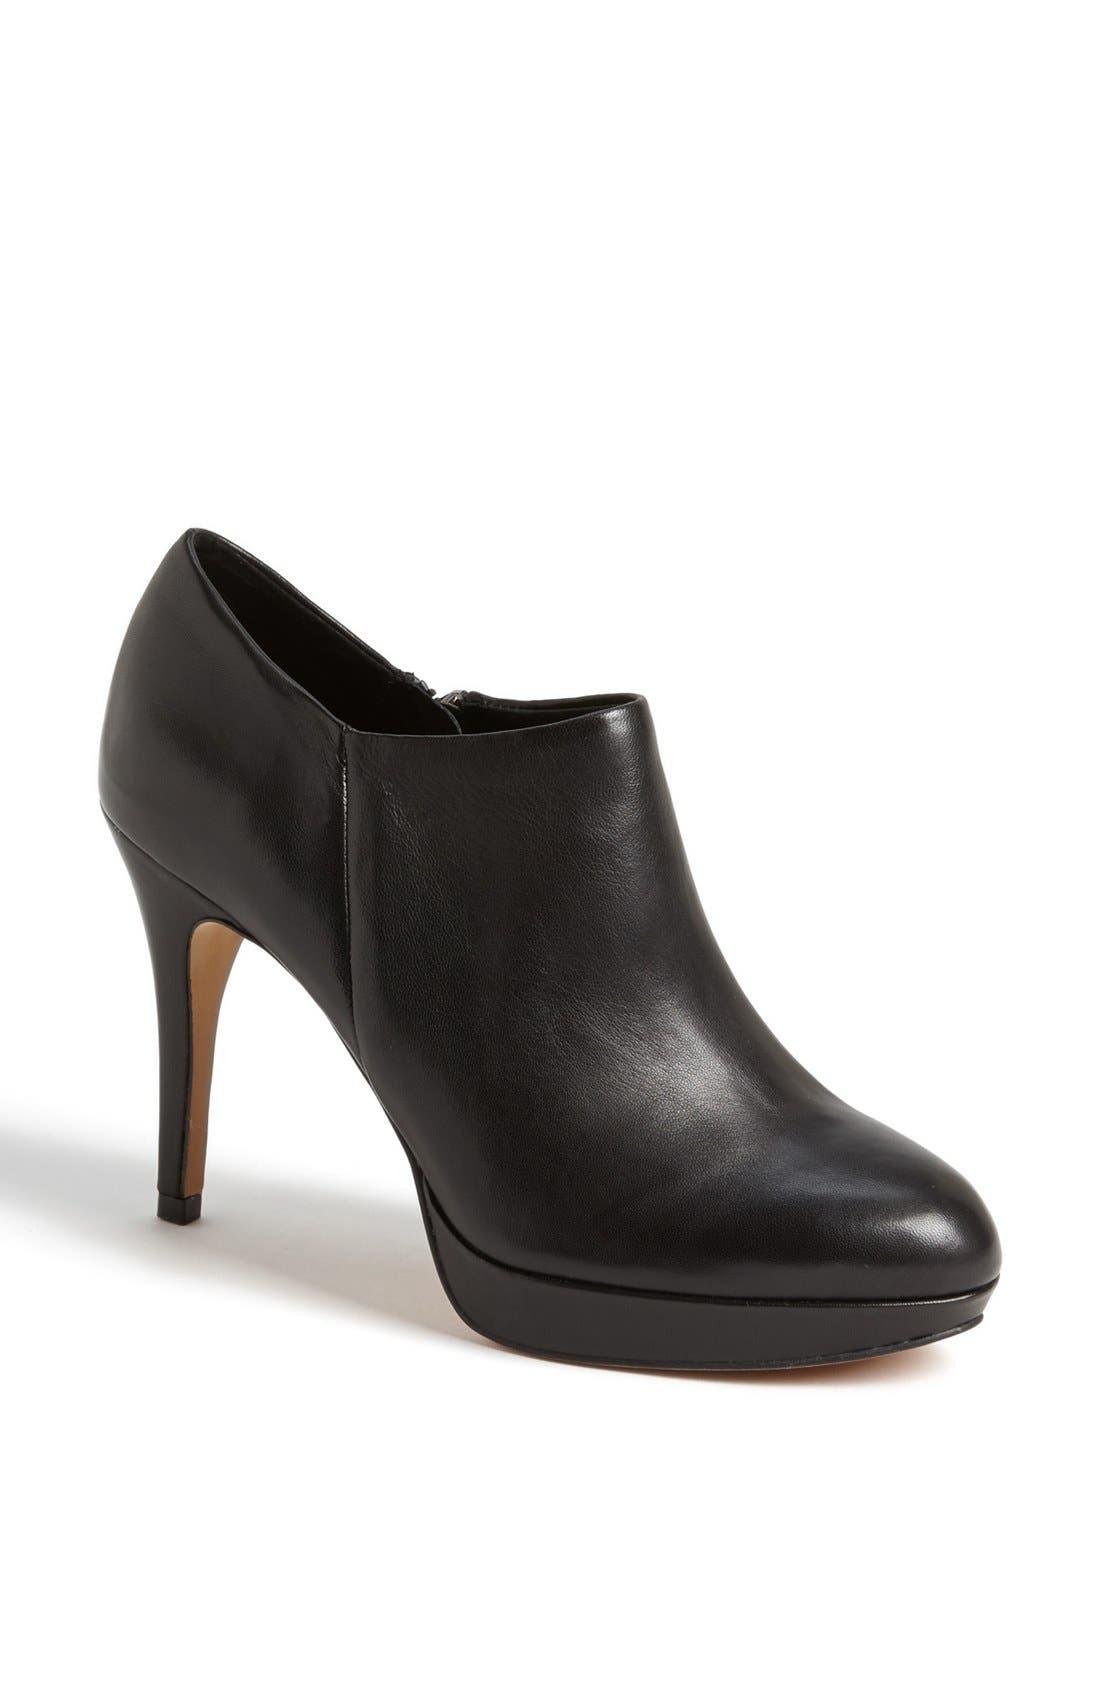 UPC 886216641363 product image for Women's Vince Camuto 'Elvin' Bootie, Size 8 M - Black | upcitemdb.com